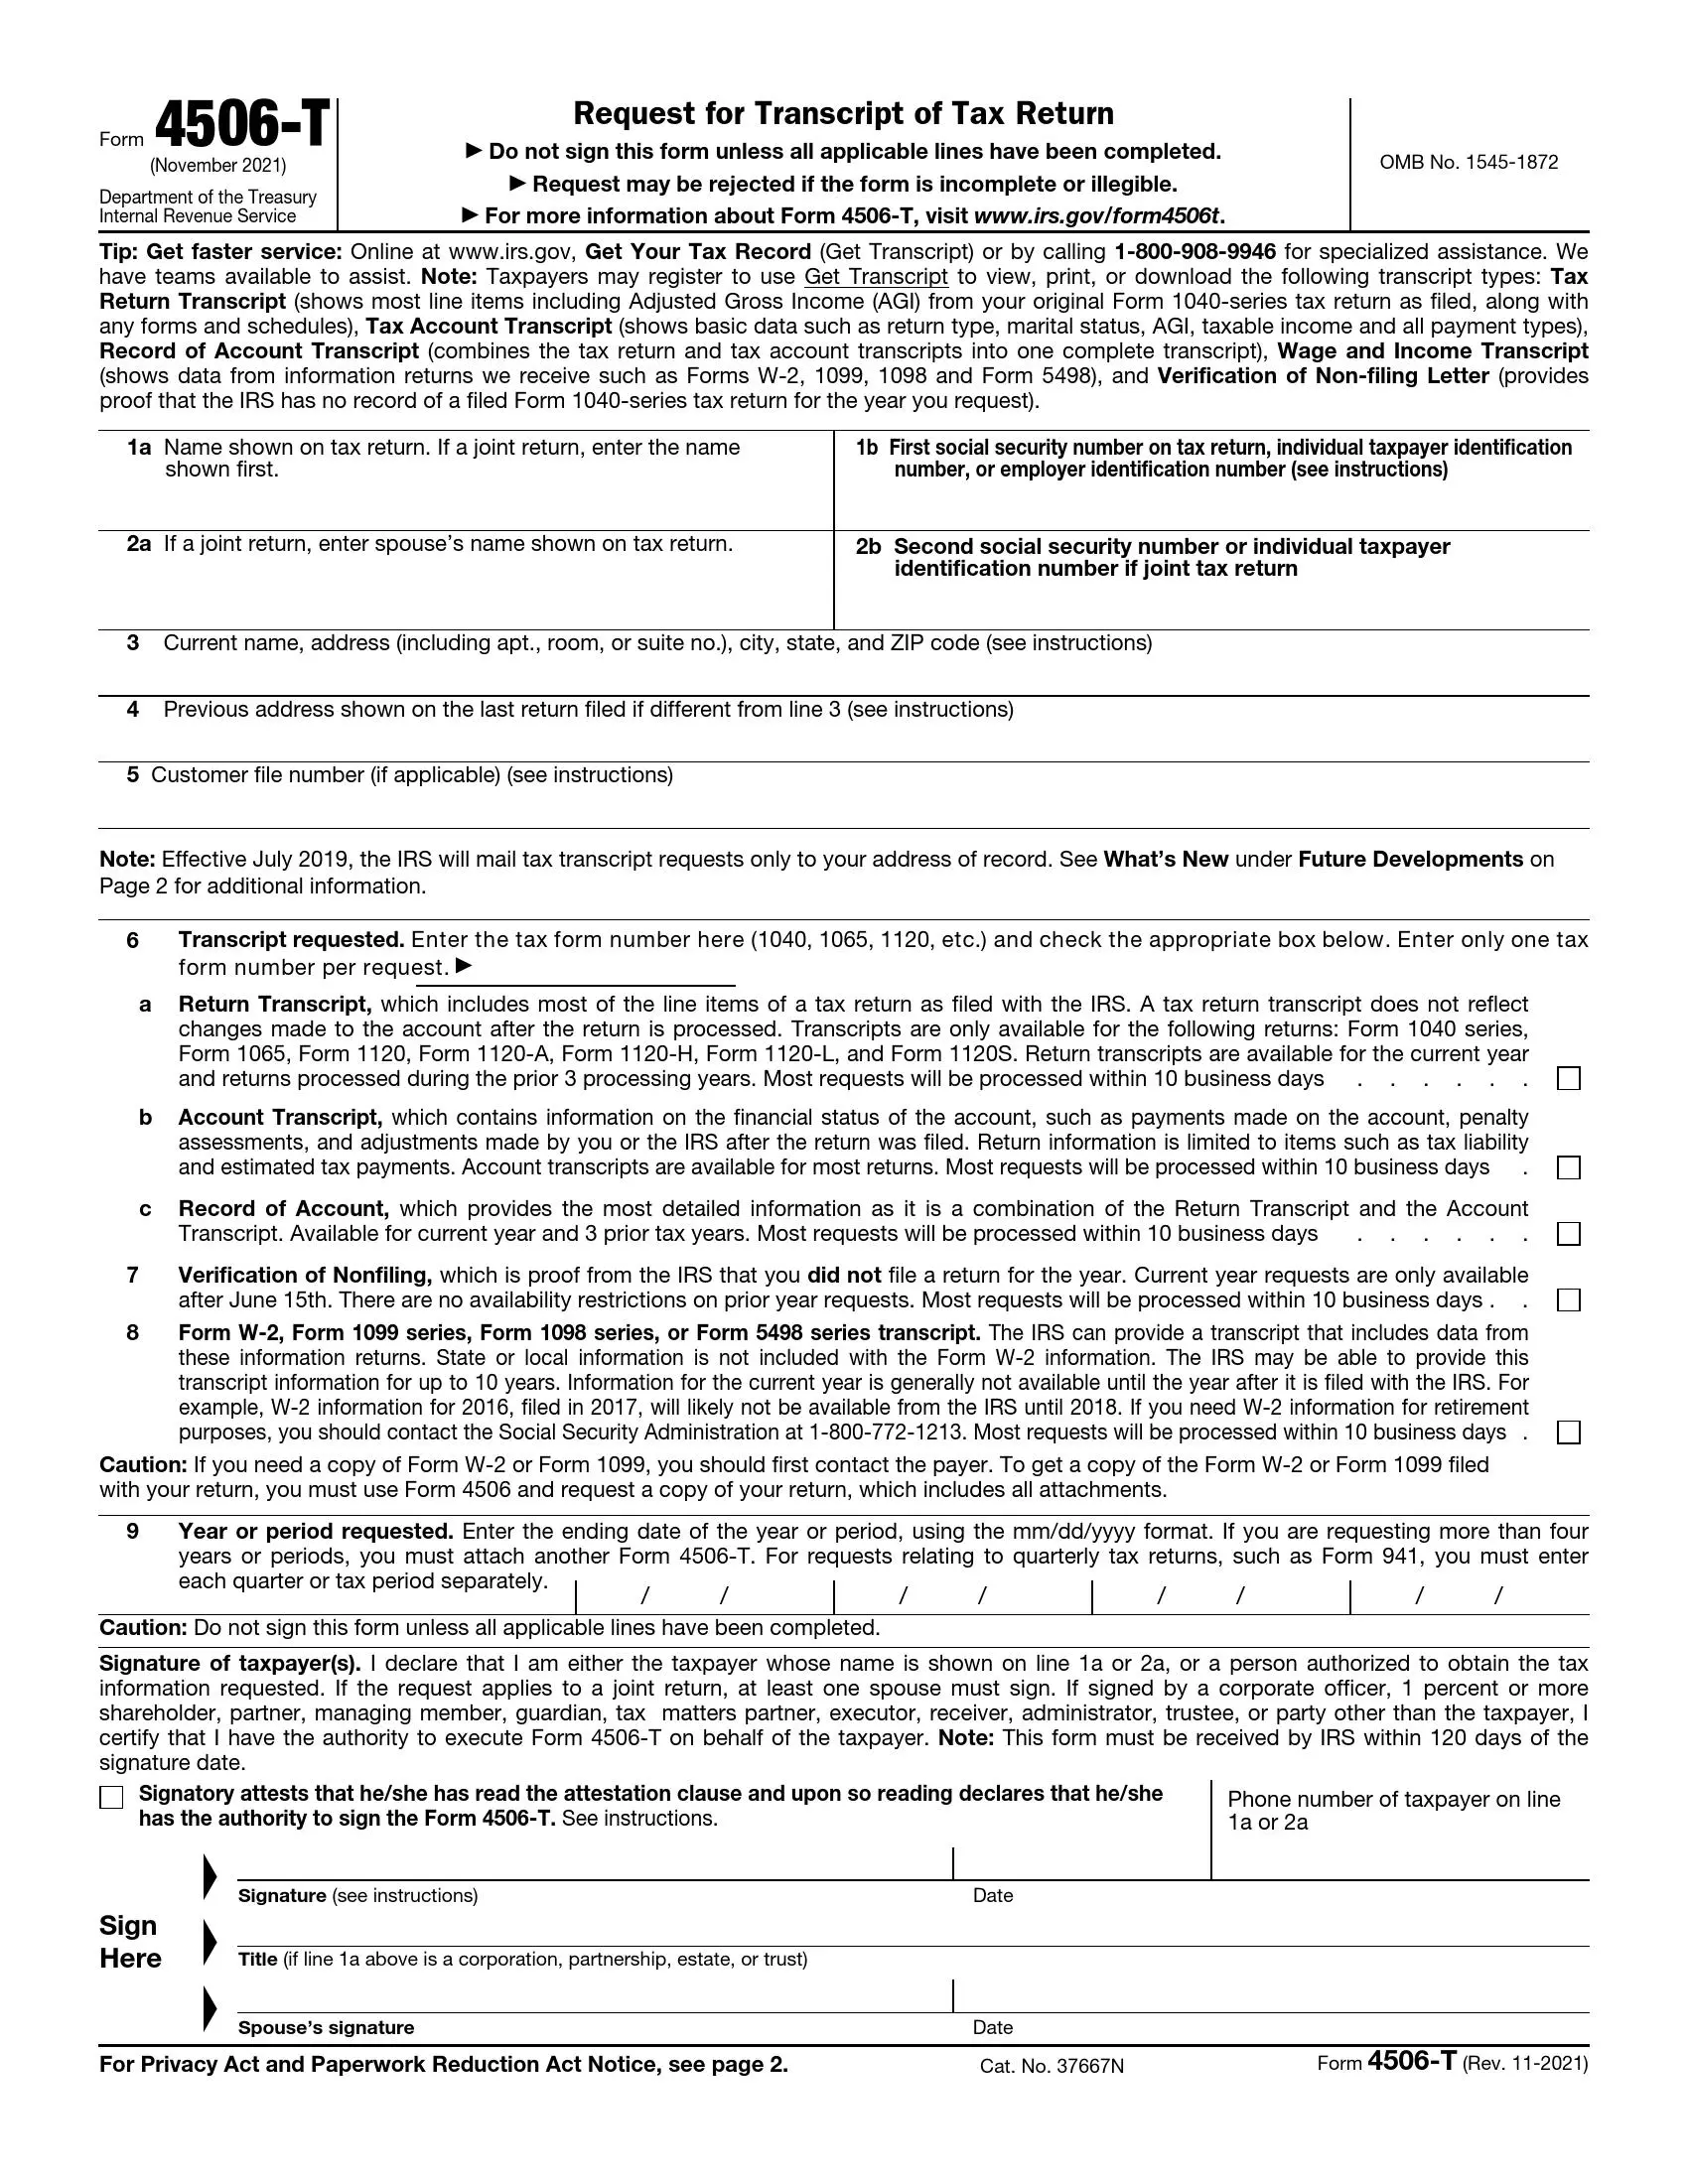 irs form 4506-t rev 11 2021 preview